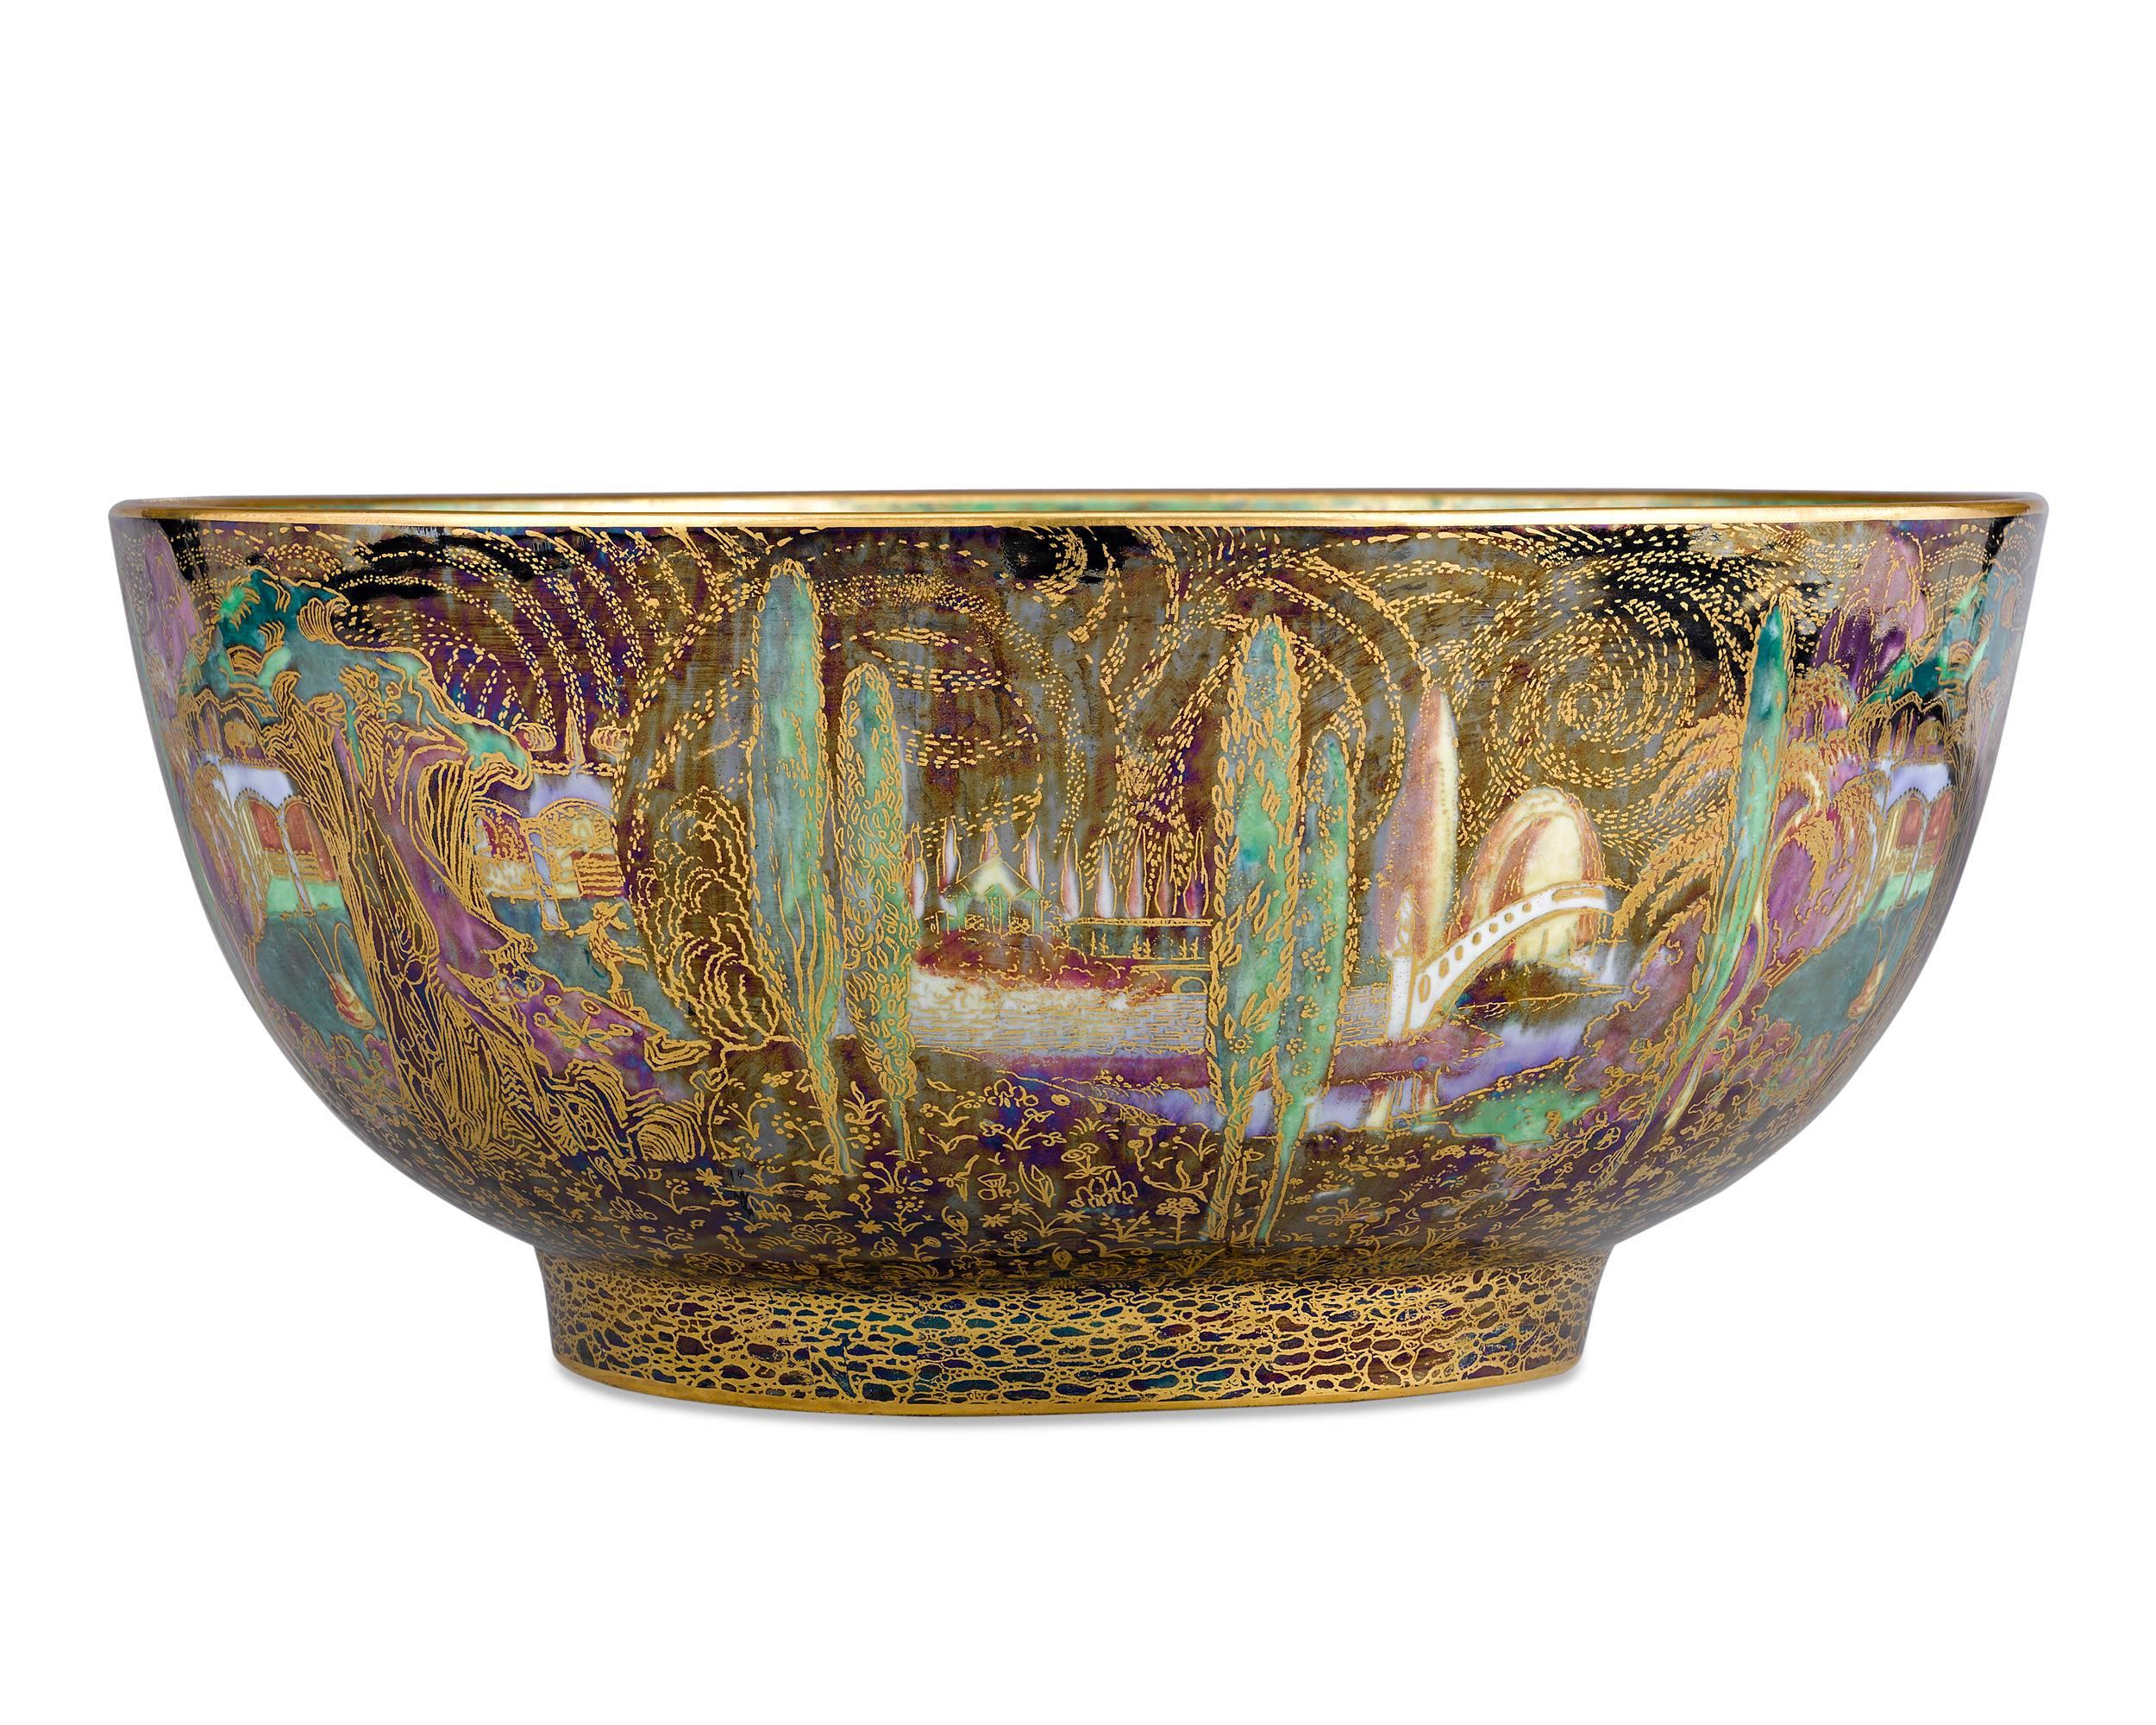 This whimsical Wedgwood Fairyland Lustre bowl designed by Daisy Makeig-Jones displays the fantastical Poplar Trees pattern, the first pattern produced under the title of Fairyland. The bowl's interior is equally fascinating, with the Woodland Bridge